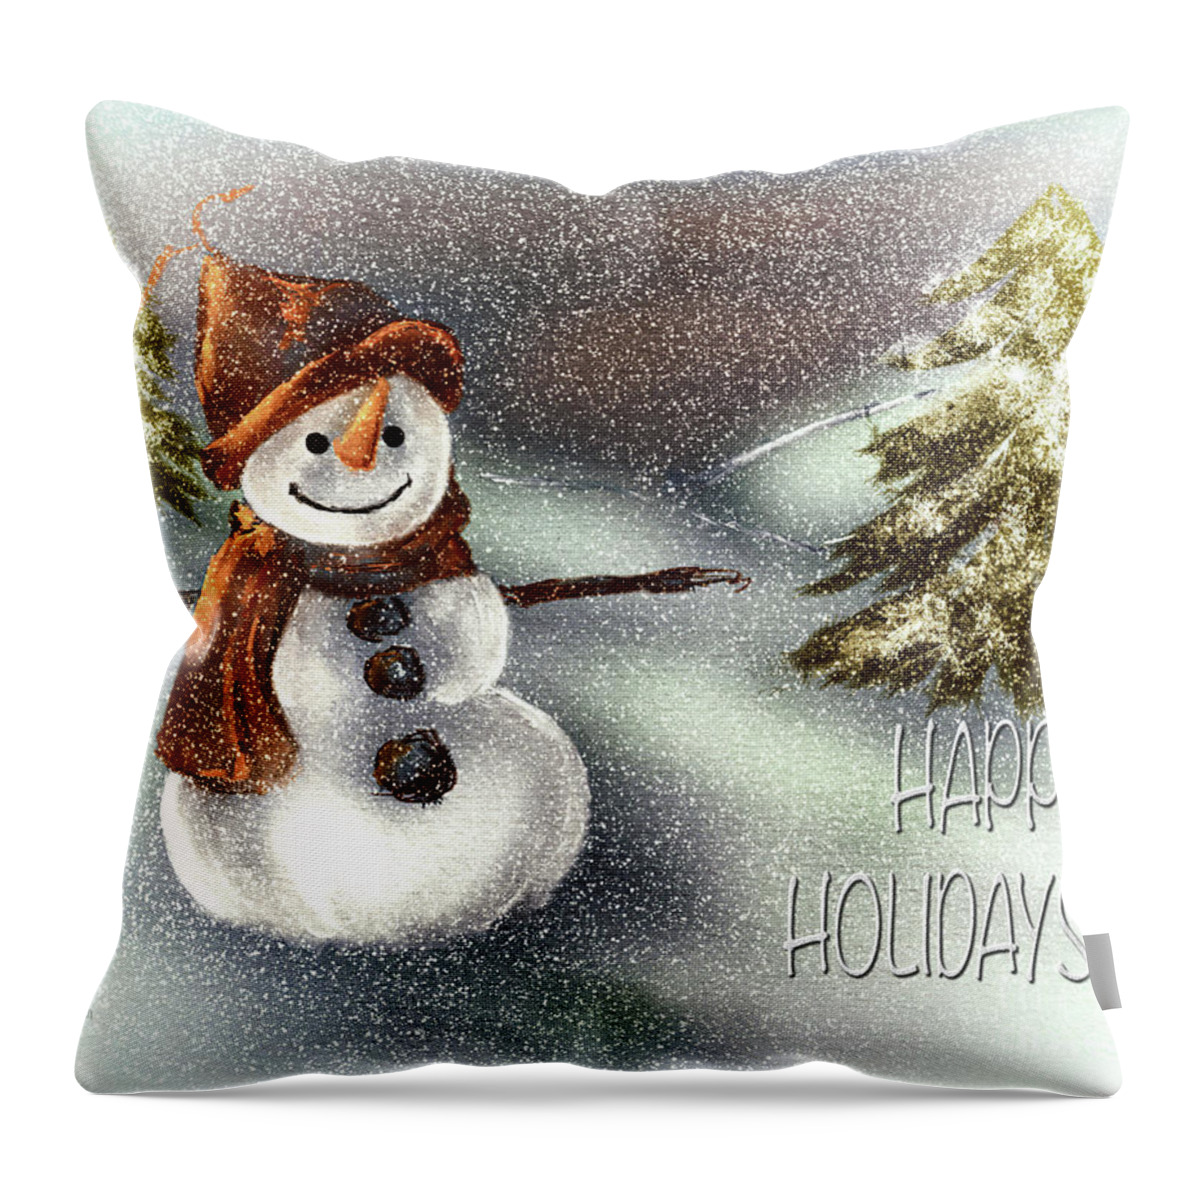 Happy Holidays Throw Pillow featuring the digital art Happy Snowman Happy Holidays by Lois Bryan